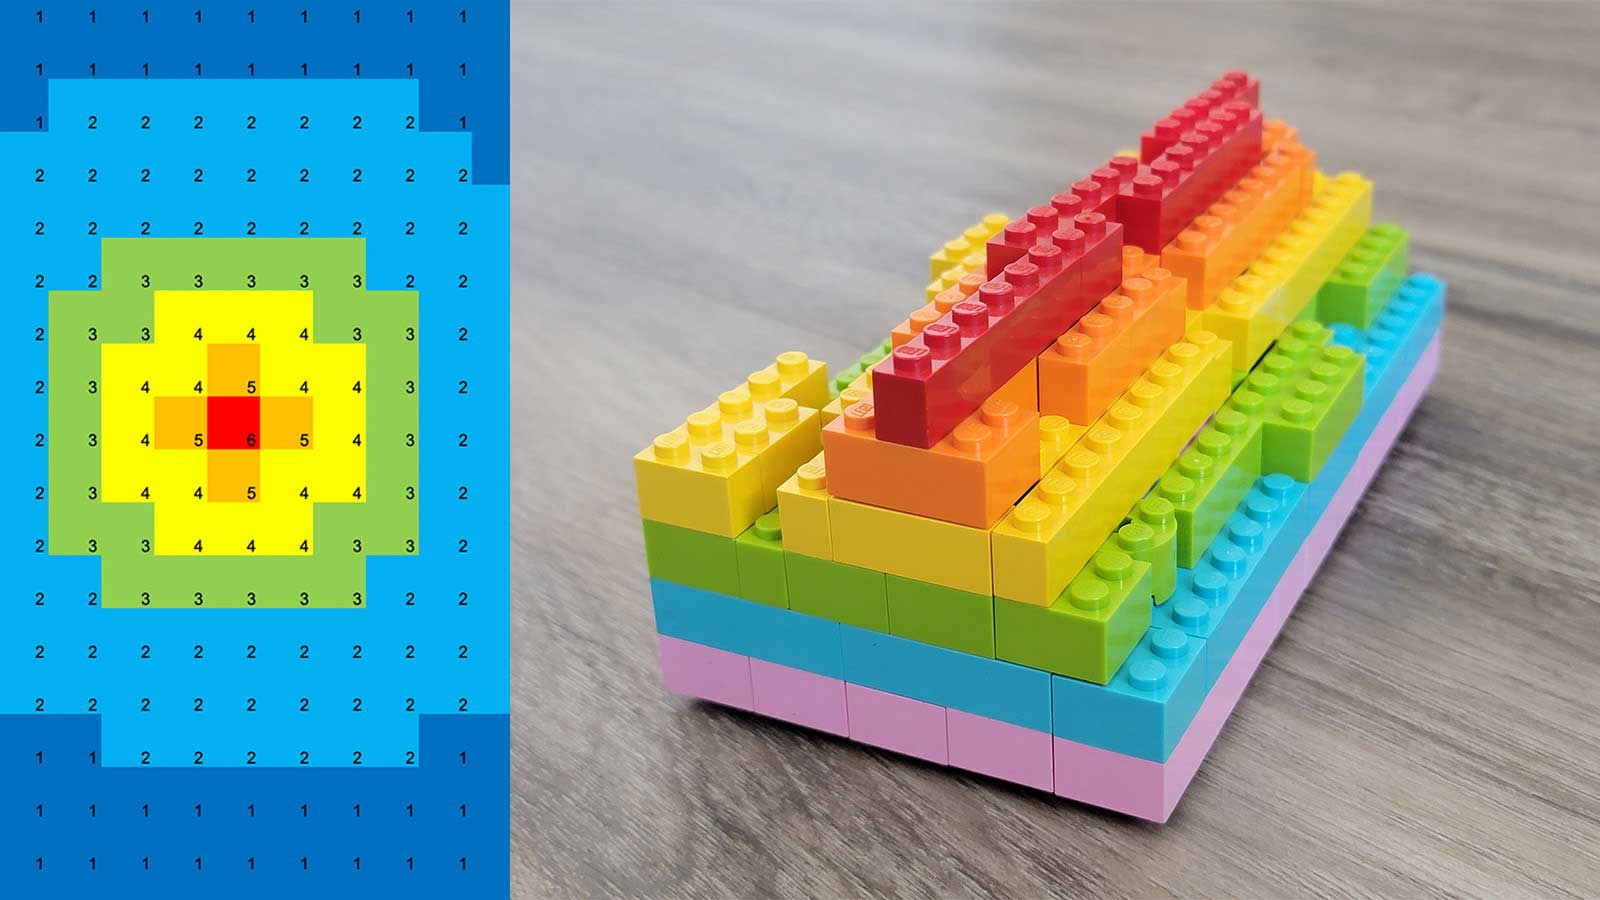 Several colors of plastic building bricks stacked together.